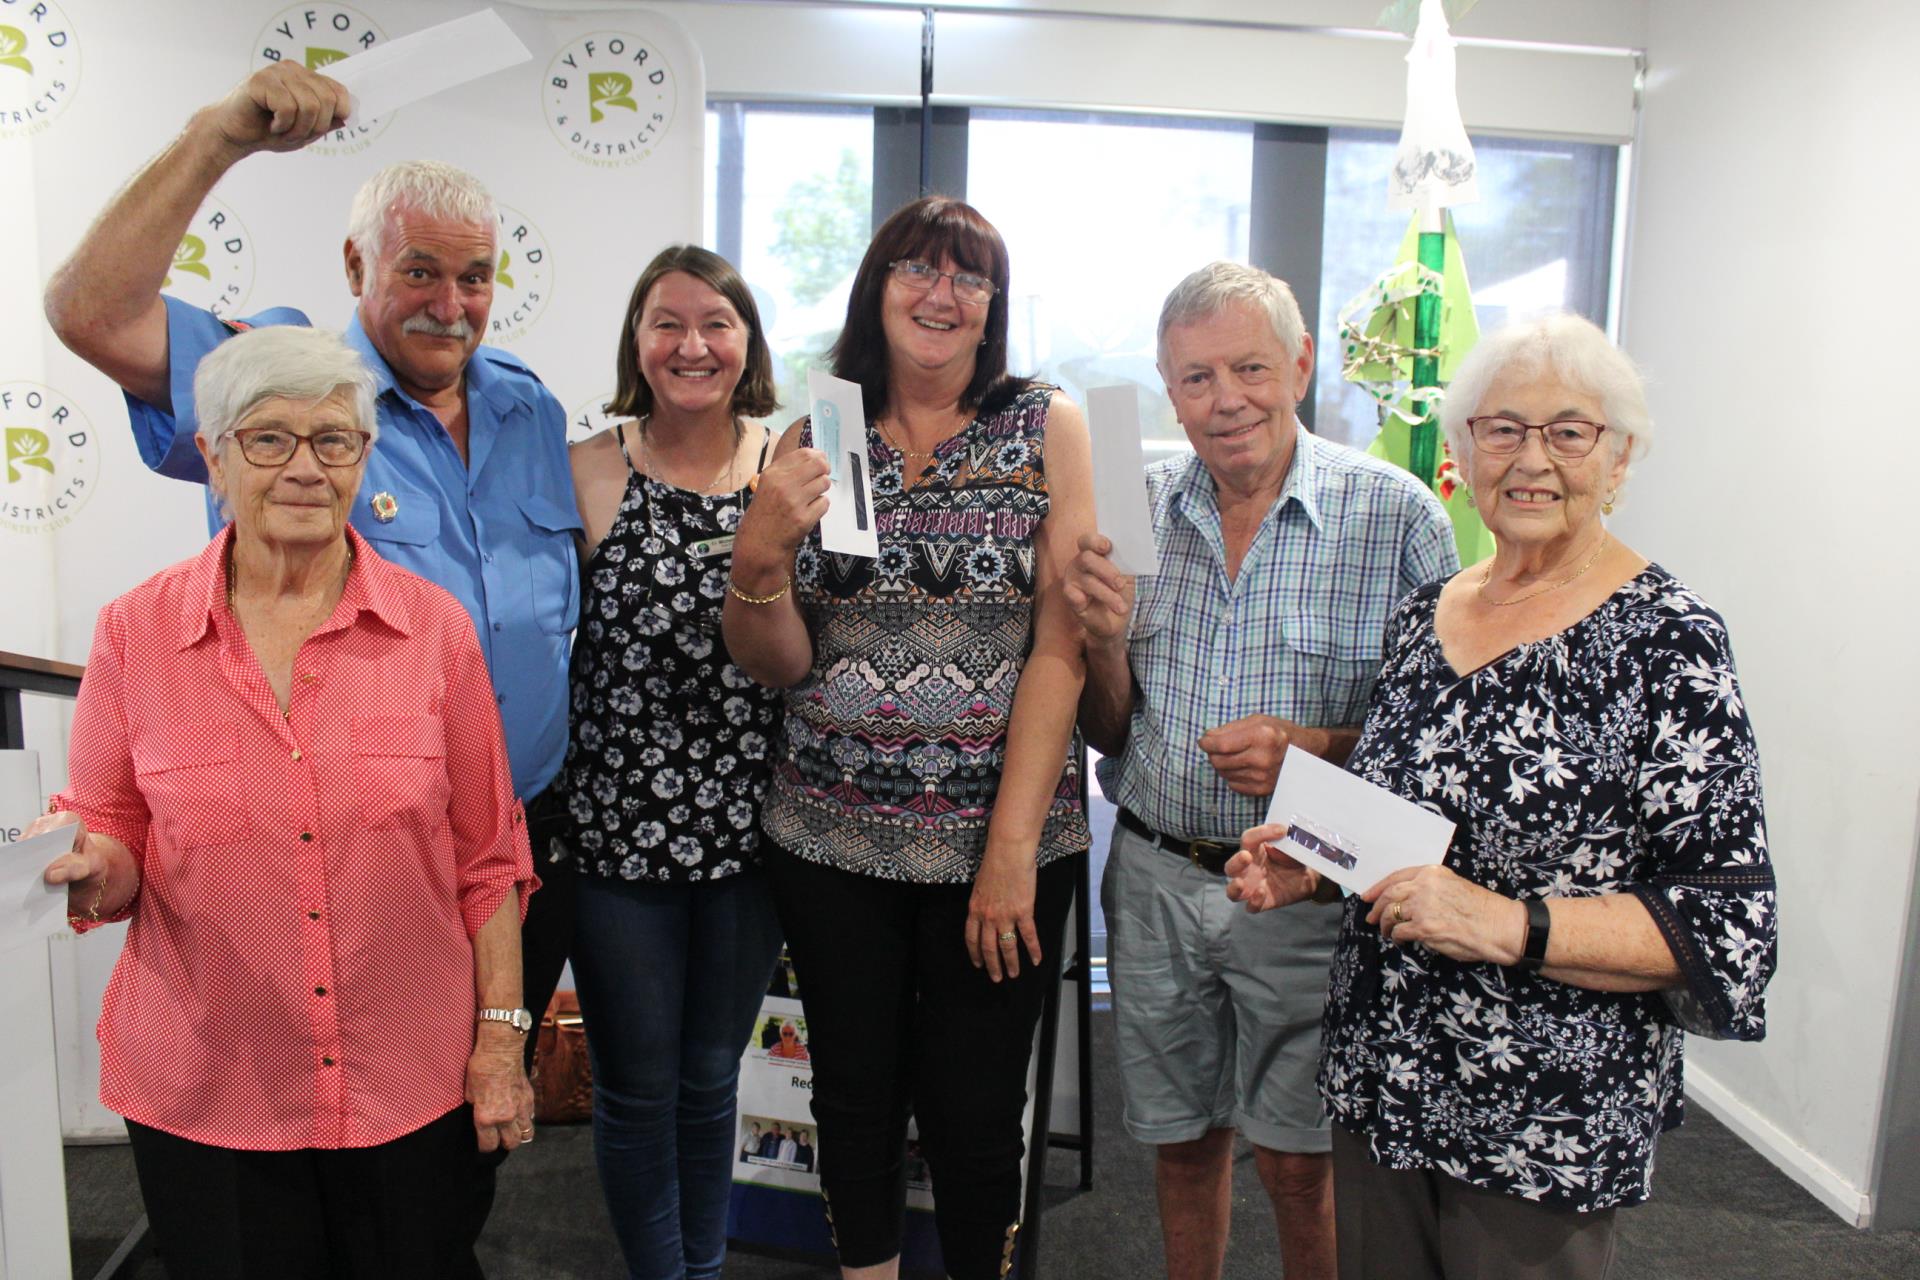 Shire President Cr Michelle Rich presents a $50 gift voucher from Byford & Districts Country Club to lucky volunteers Helen Rowe, Byford United Church, Neil Munkley, Byford Volunteer Bushfire Brigade, Christine Wales, Byford Glades Community Garden Inc., Charles Kerfoot, Jarrahdale Heritage Society and Yvonne Lovegrove, Byford Progress Association.